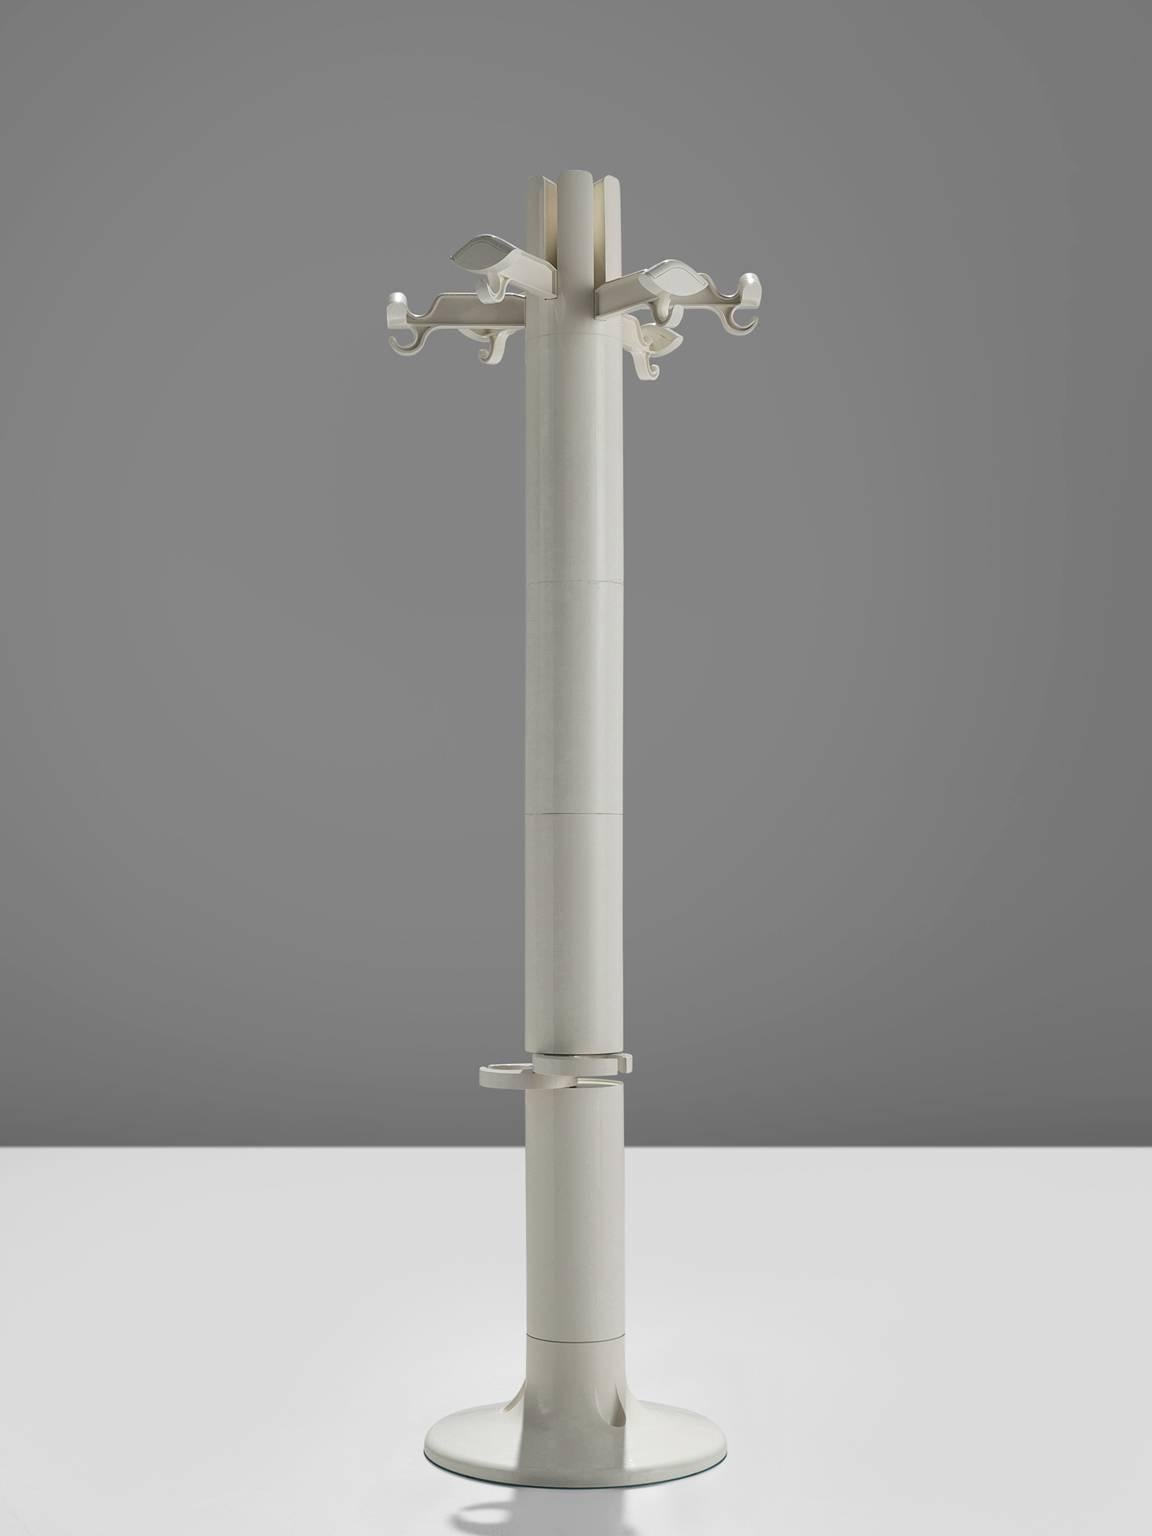 Giancarlo Piretti for Castelli, coat rack, polyester, Italy, 1970s

The 'Planta' coat is a design by Giancarlo Piretti. The coat rack is produced by Castelli in the 1970s. The hood with umbrella holder is made of white plastic. A surprising design